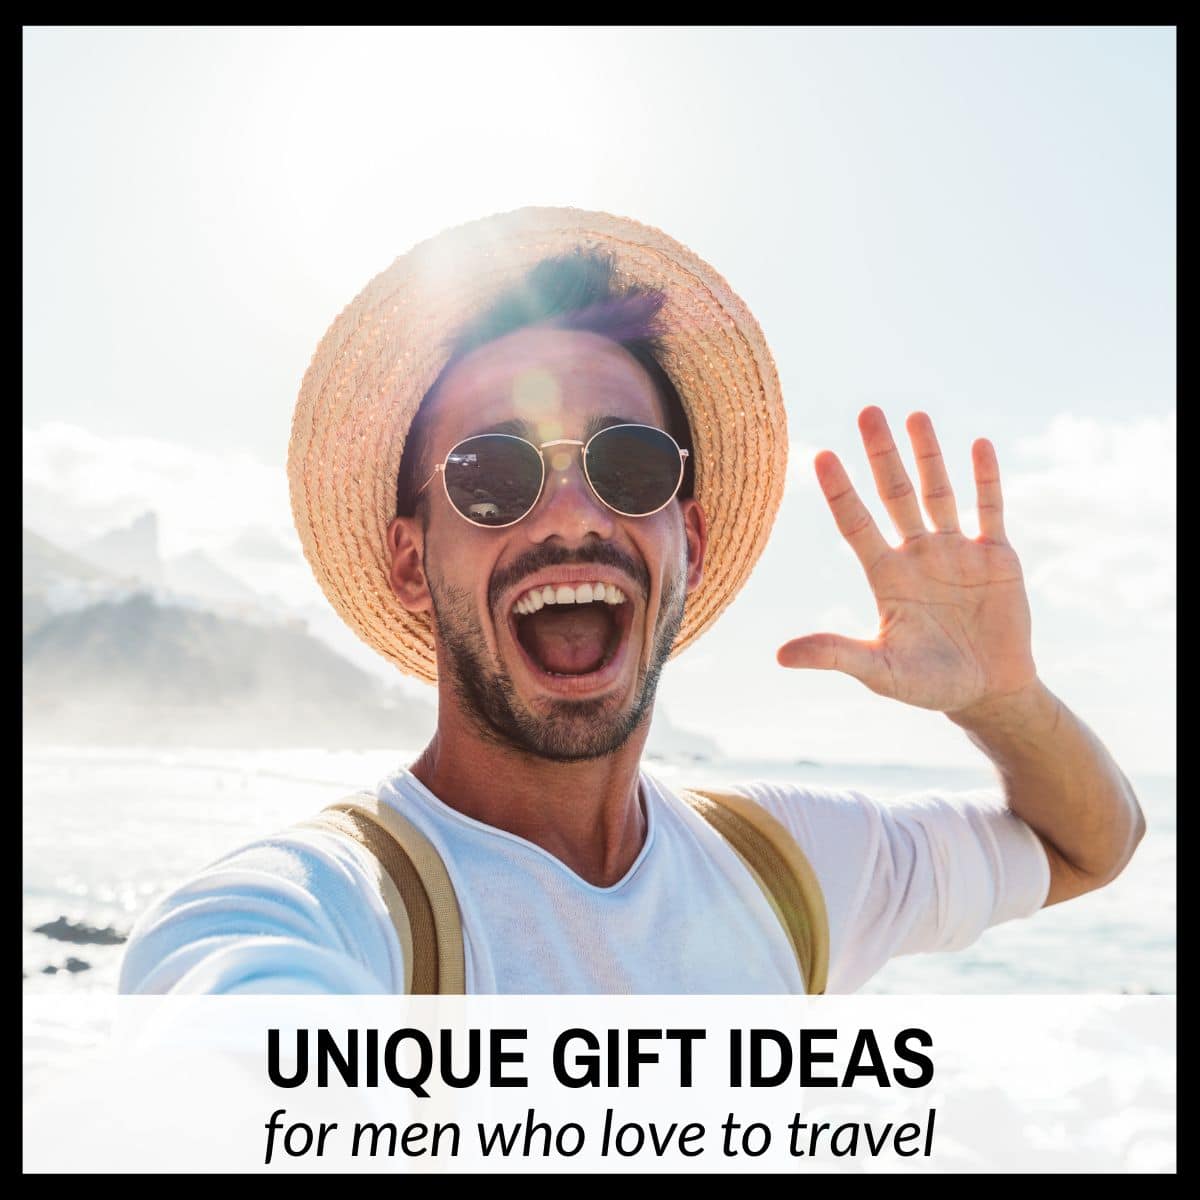 Holiday Shopping 2020: 11 Practical Gift Ideas for Men He'll Love -  Dreaming Loud